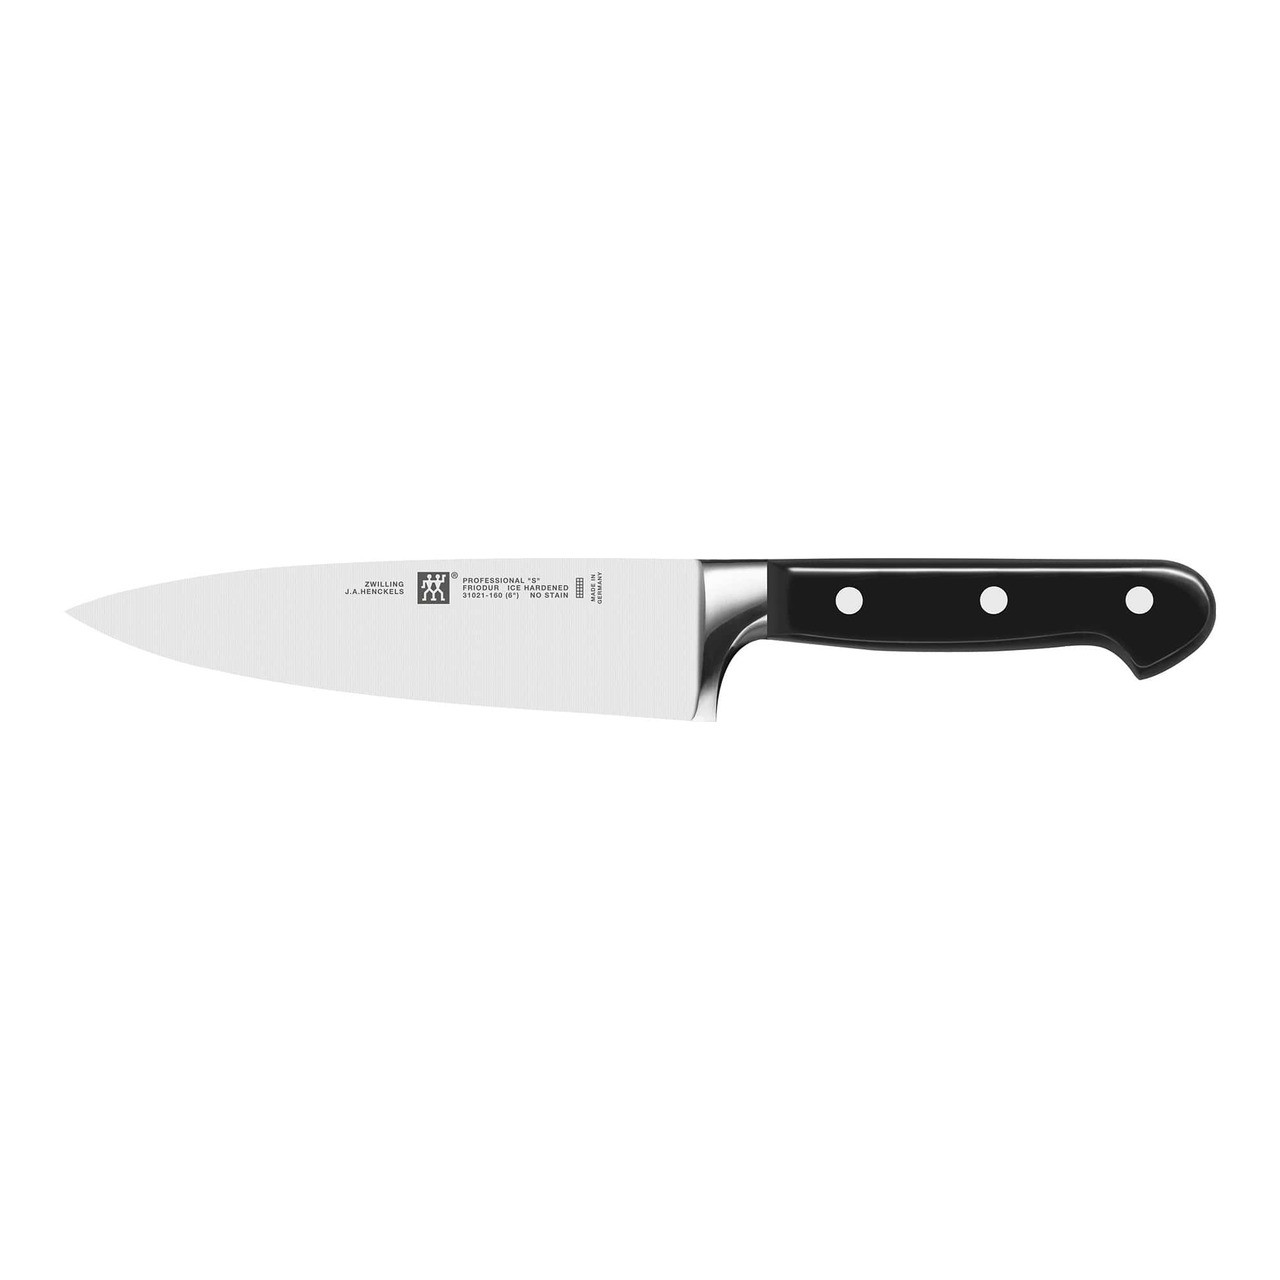 https://cdn11.bigcommerce.com/s-hccytny0od/images/stencil/1280x1280/products/612/706/zwilling-ja-henckels-professional-s-chefs-knife__58063.1509663985.jpg